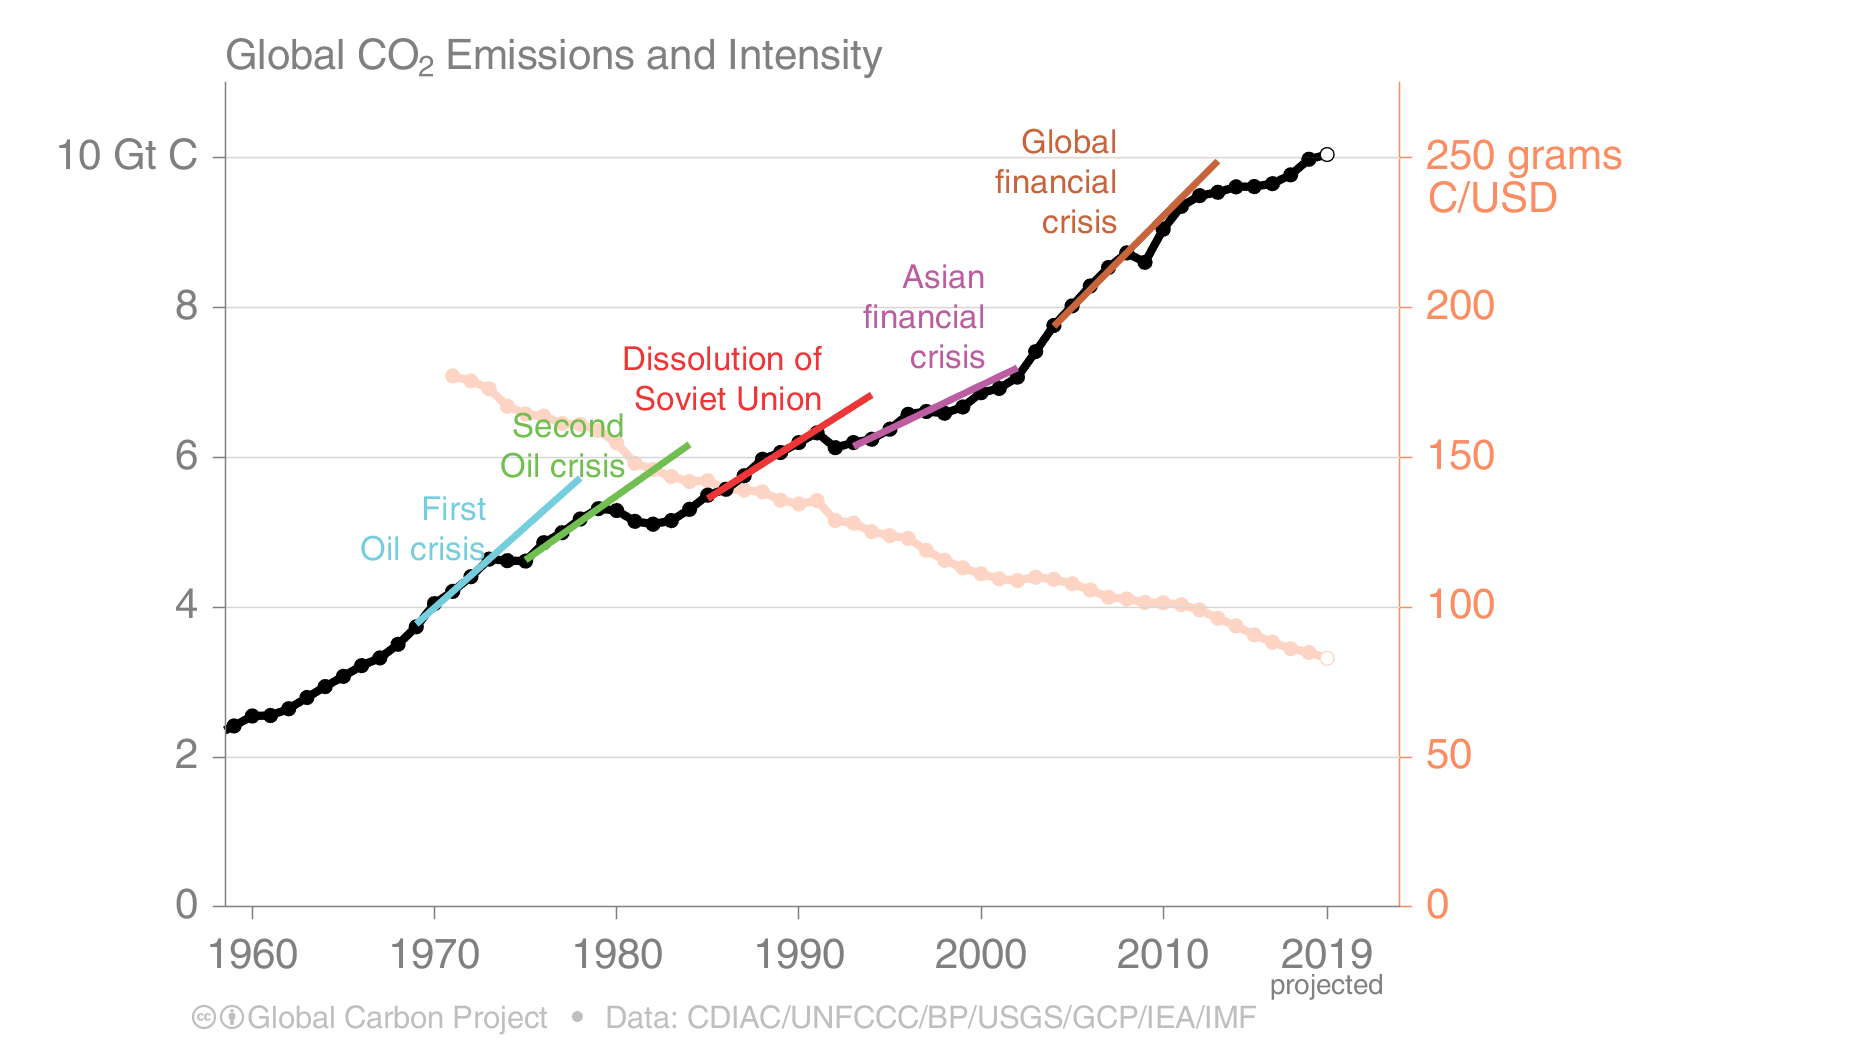 CO2 emissions have quickly recovered after previous economic crises. Source: Global Carbon Budget 2019